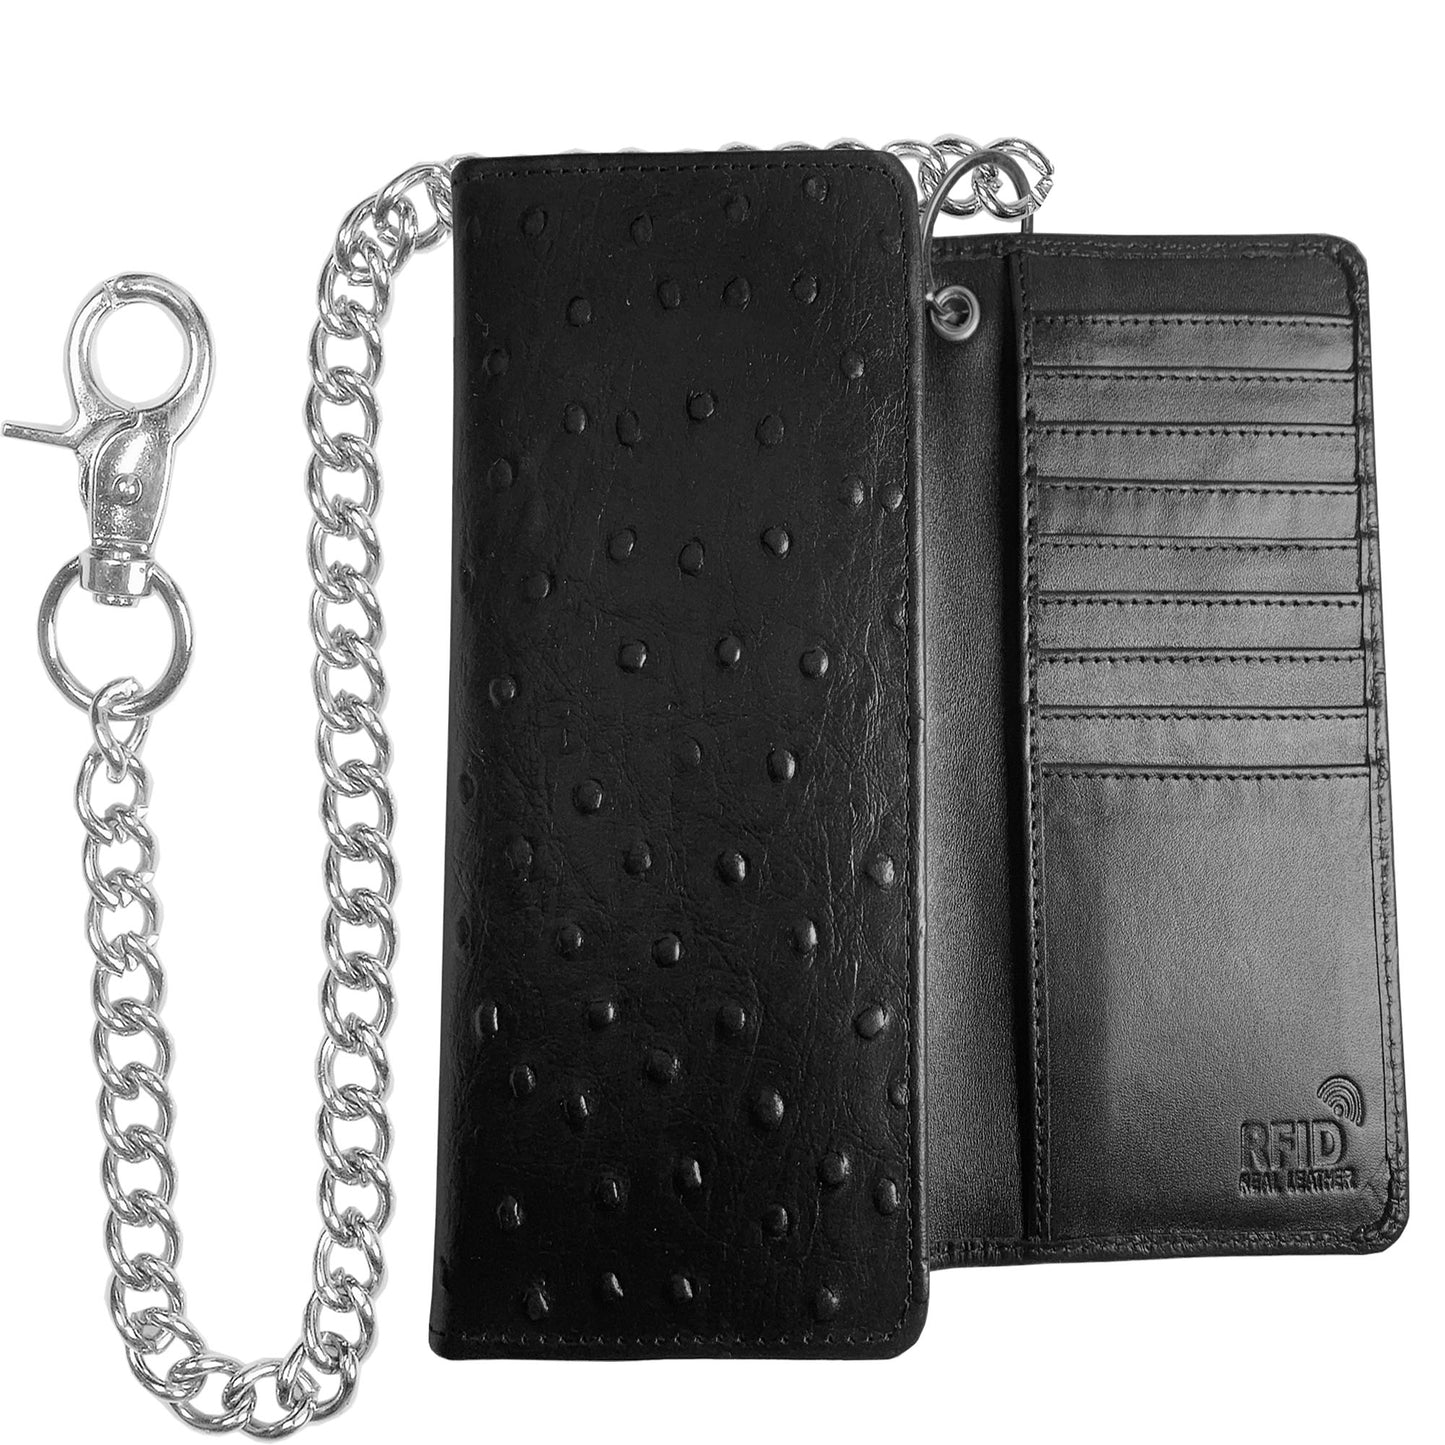 IBRO Motorcycle Chain Wallet for Men – 100% Natural Genuine Leather, Long Trifold RFID Blocking Wallet Ostrich Black